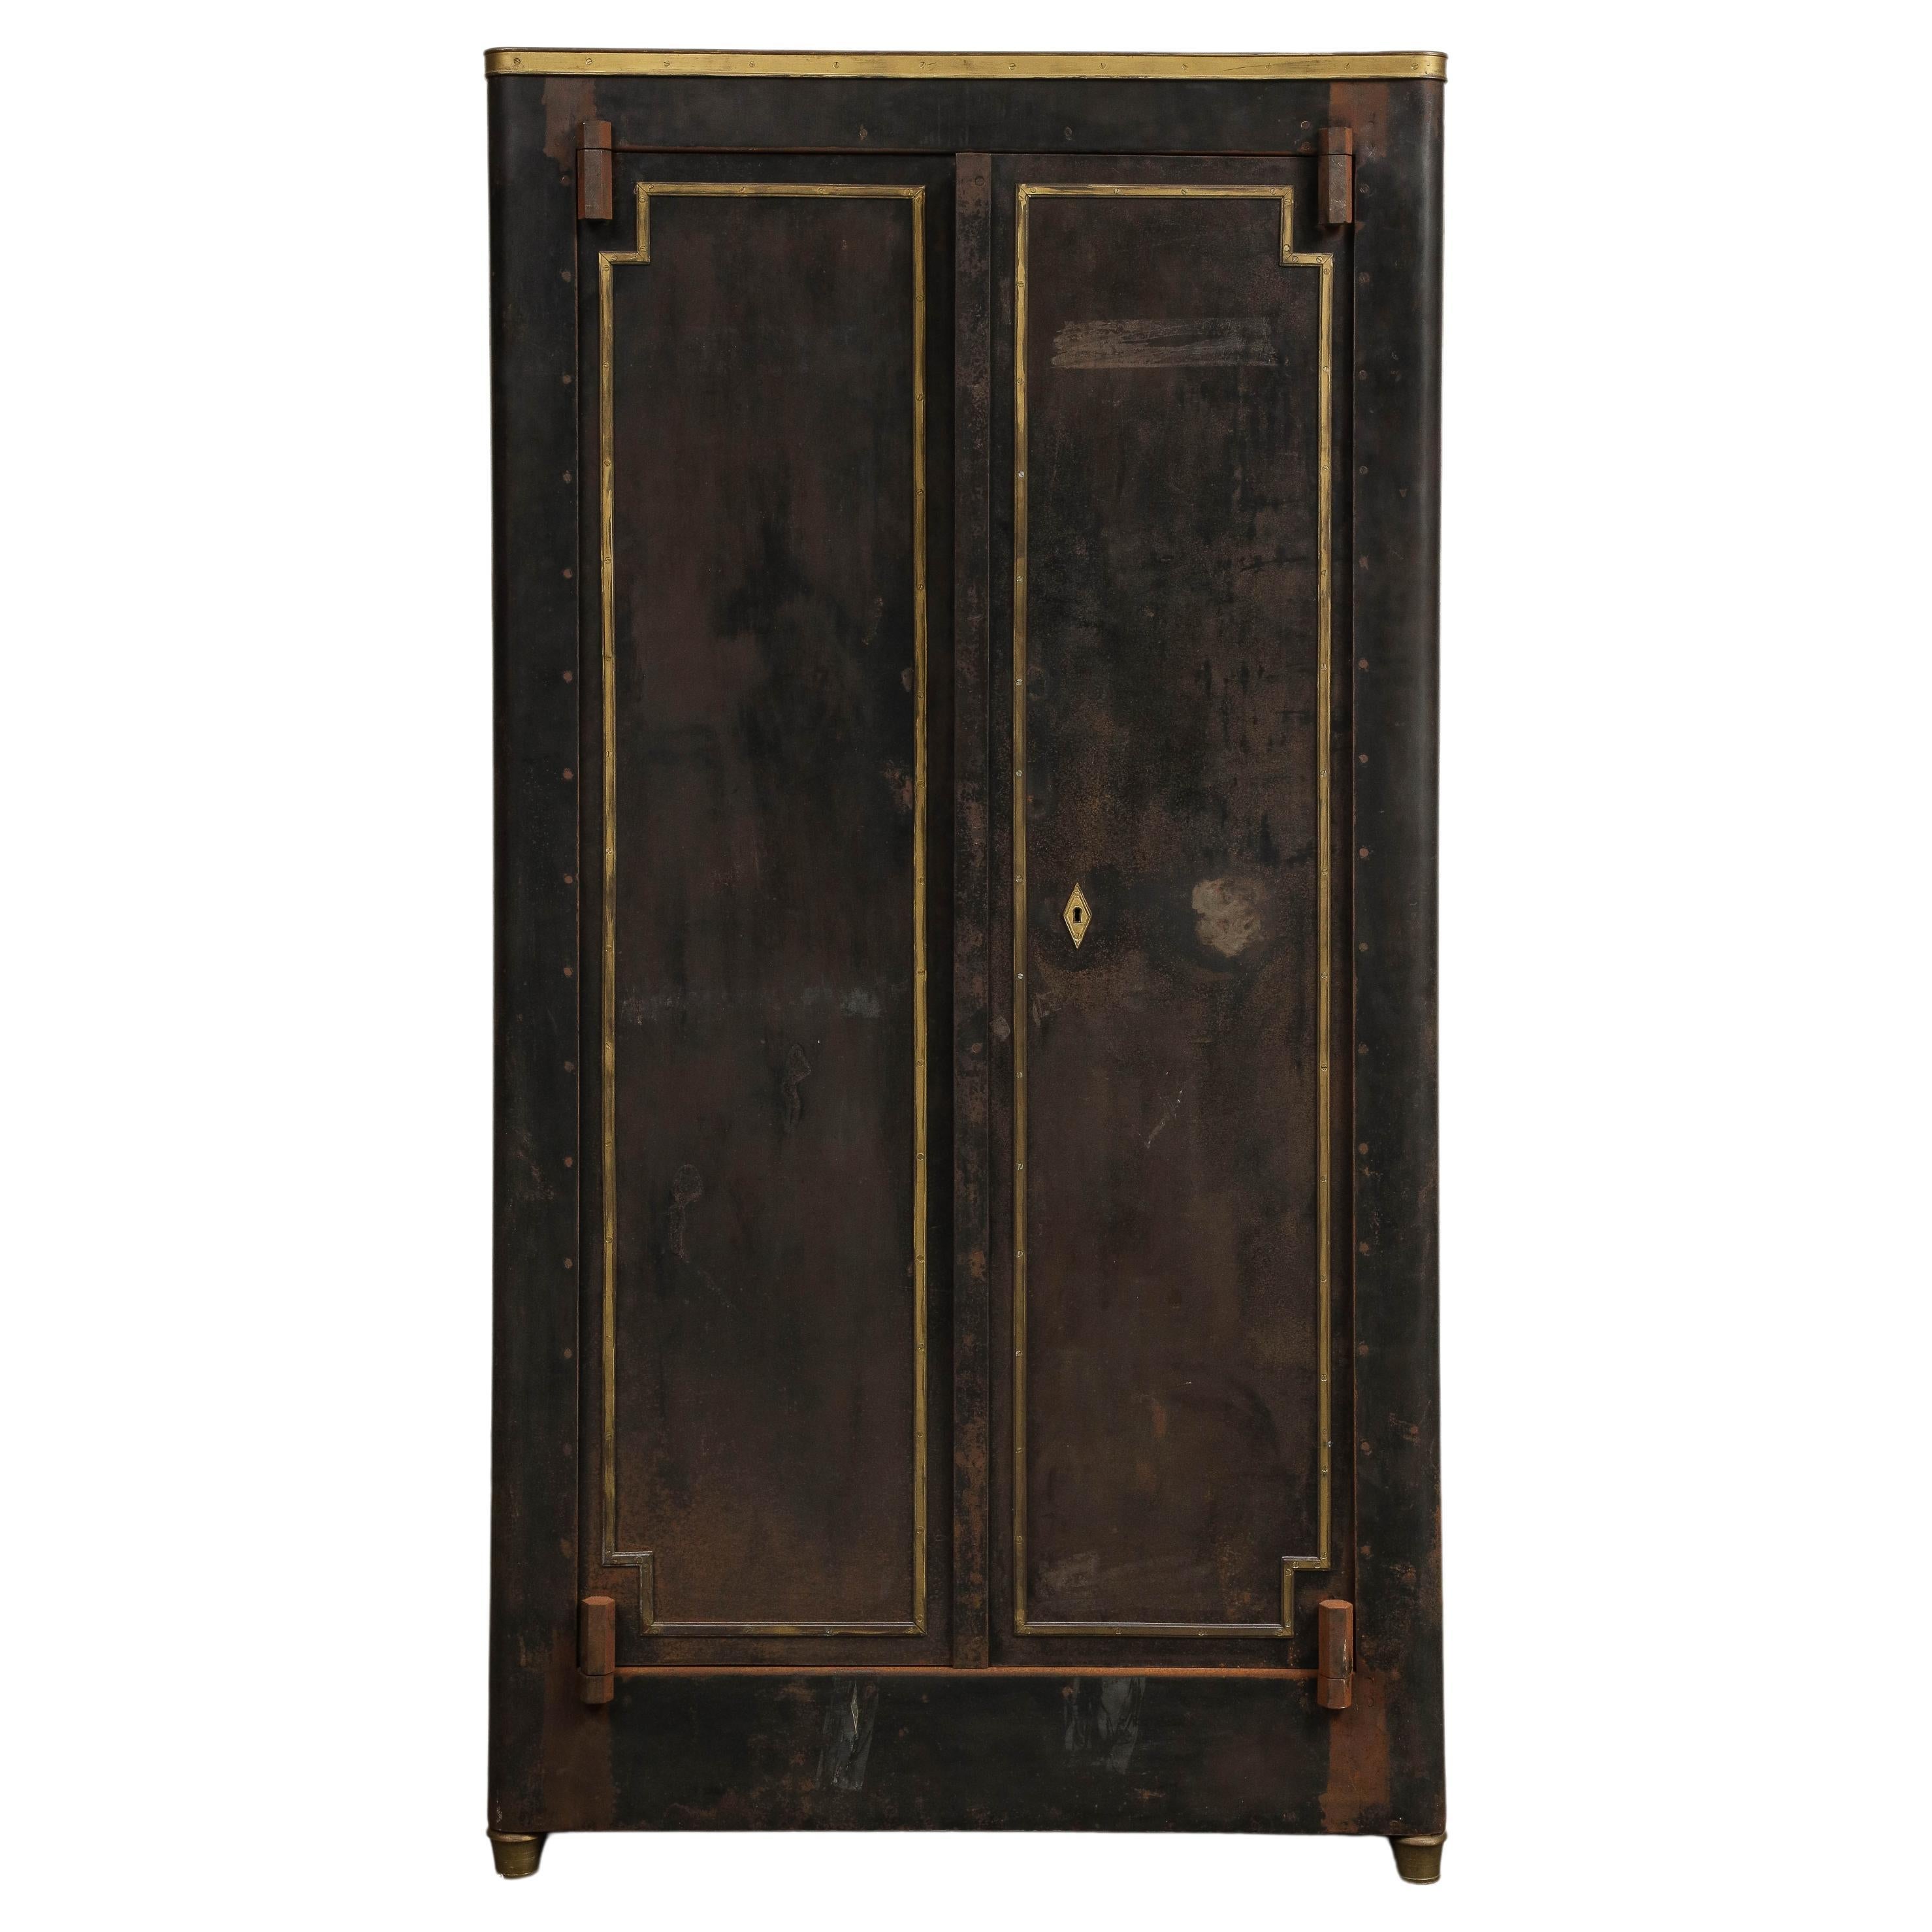 20th Century French Blackened Metal Cabinet with Brass Accents